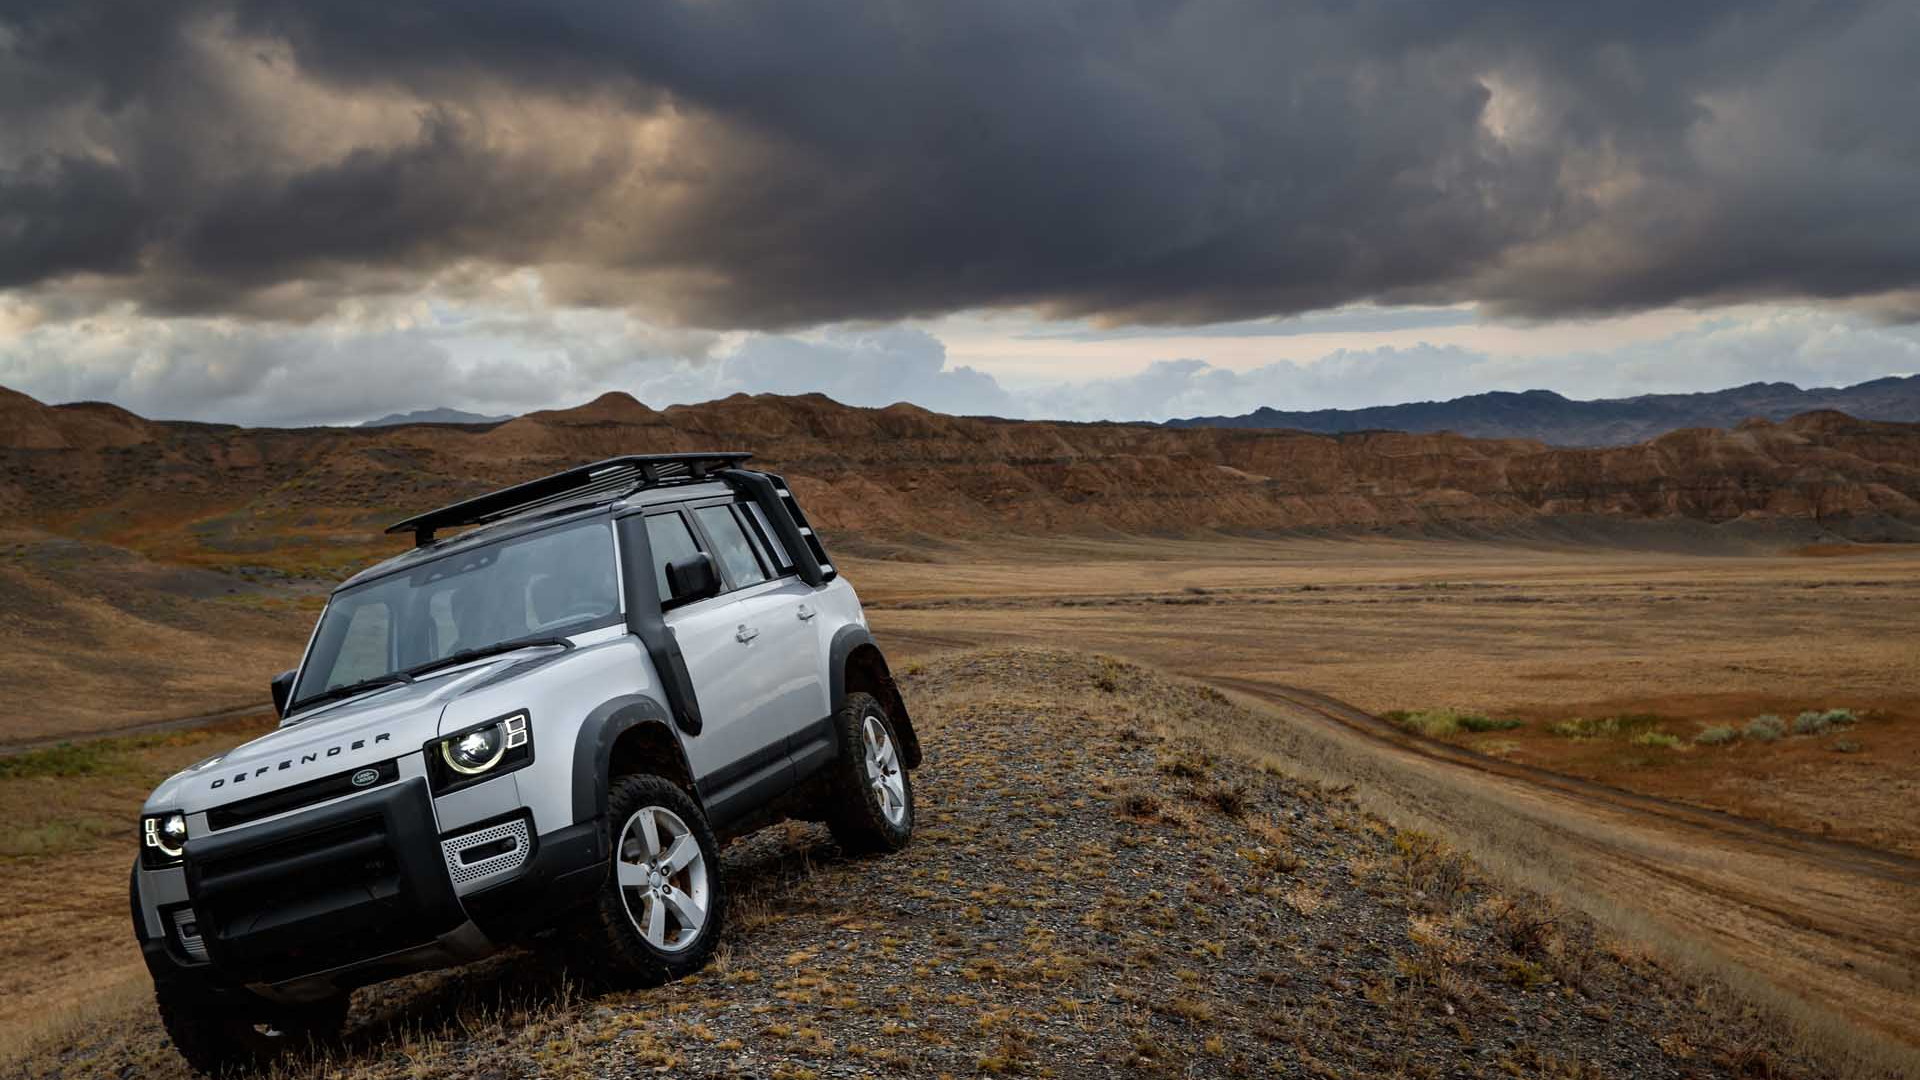  Land  Rover  wants to turn the Defender into a giant remote  